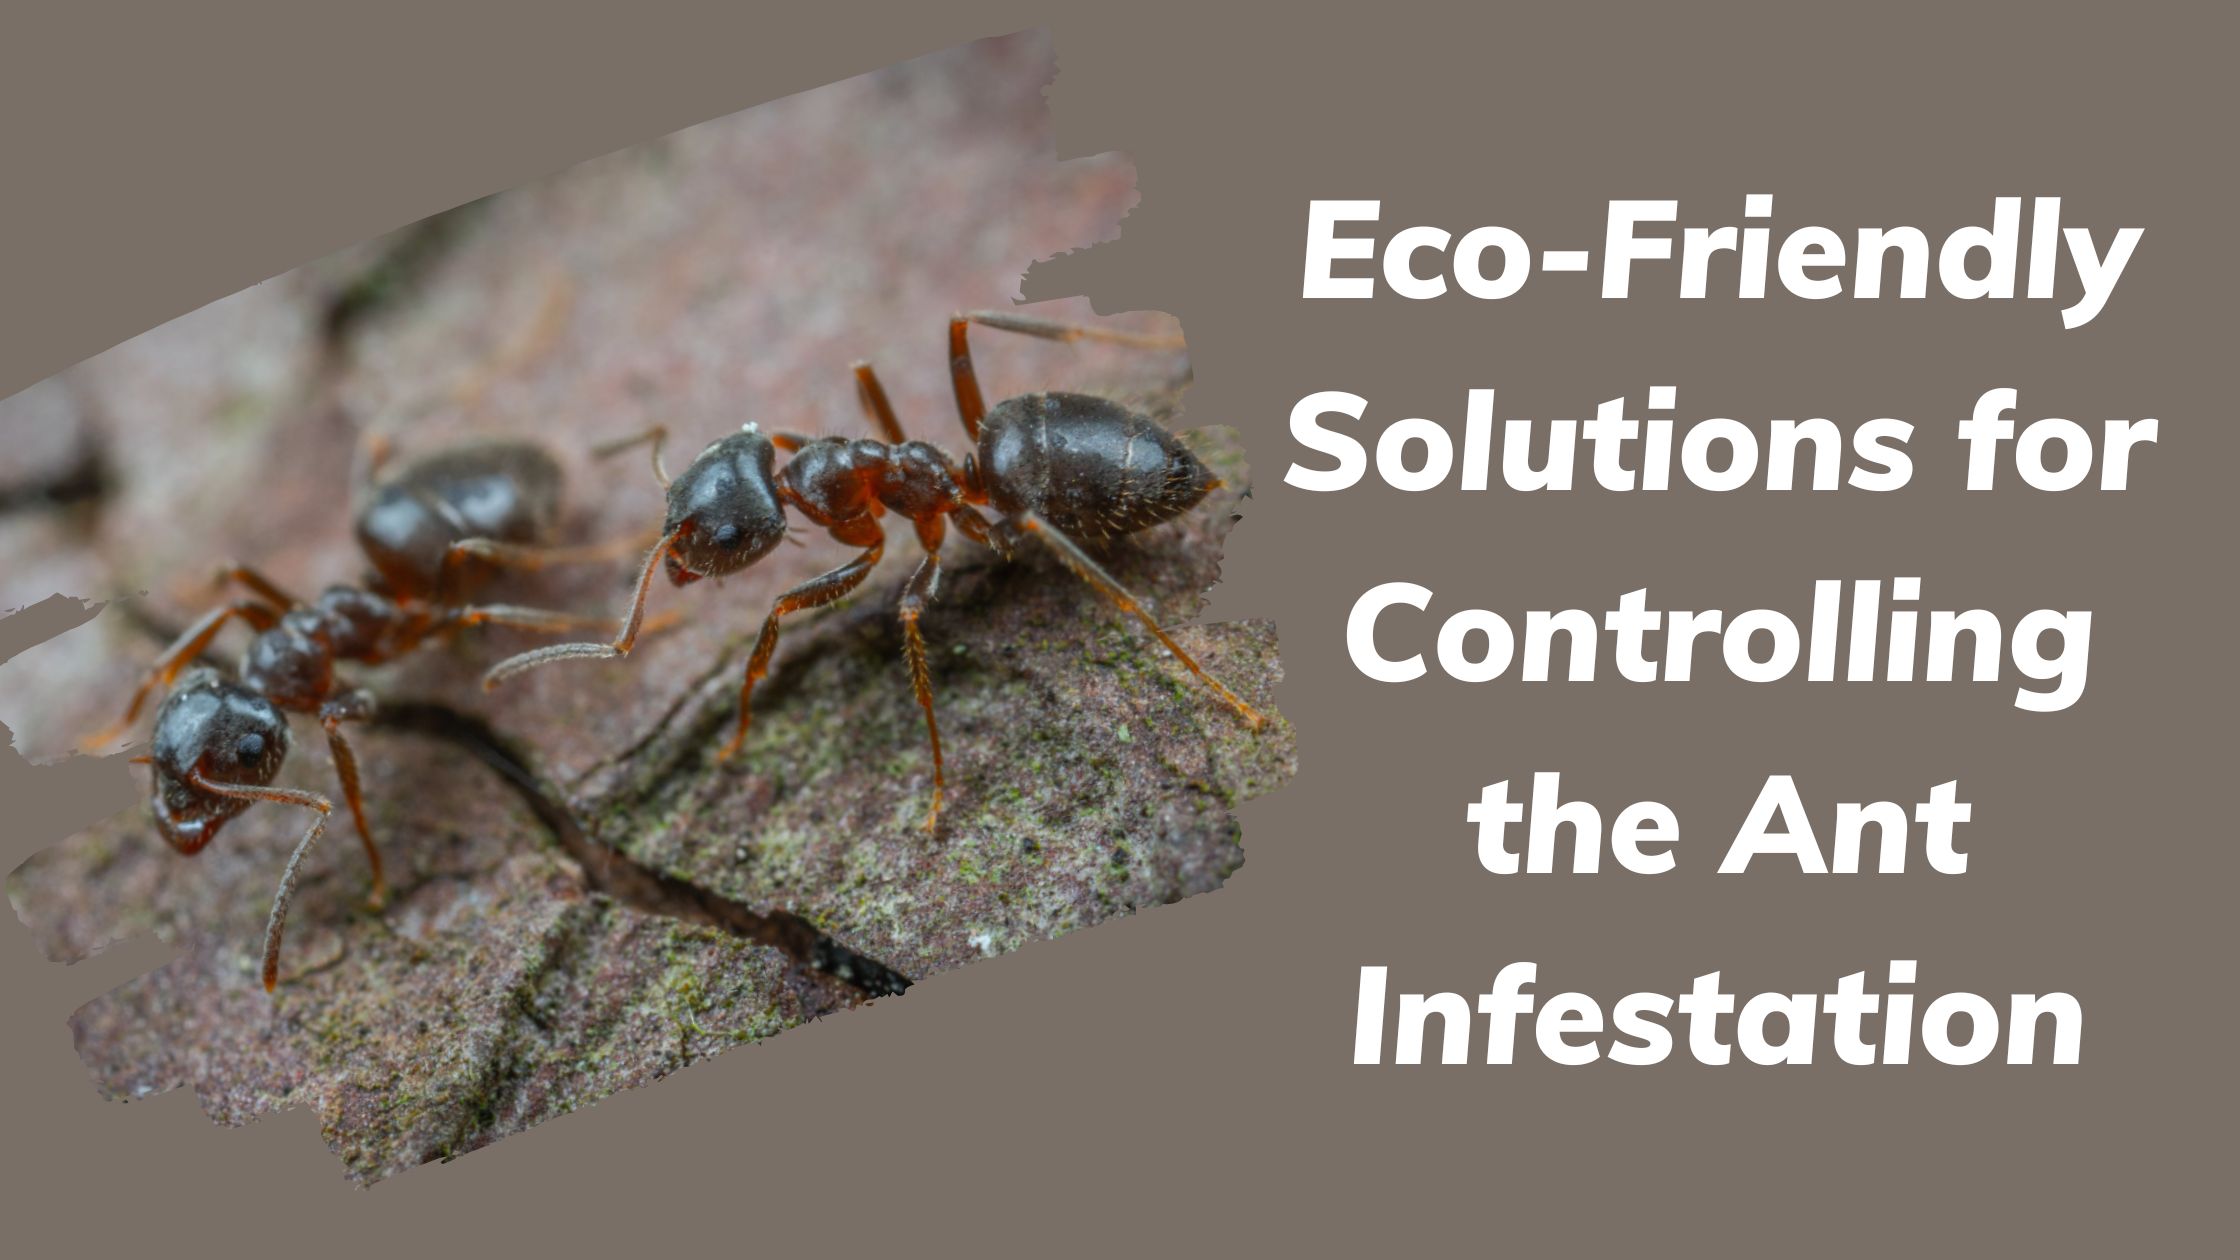 Eco-Friendly Solutions for Controlling the Ant Infestation